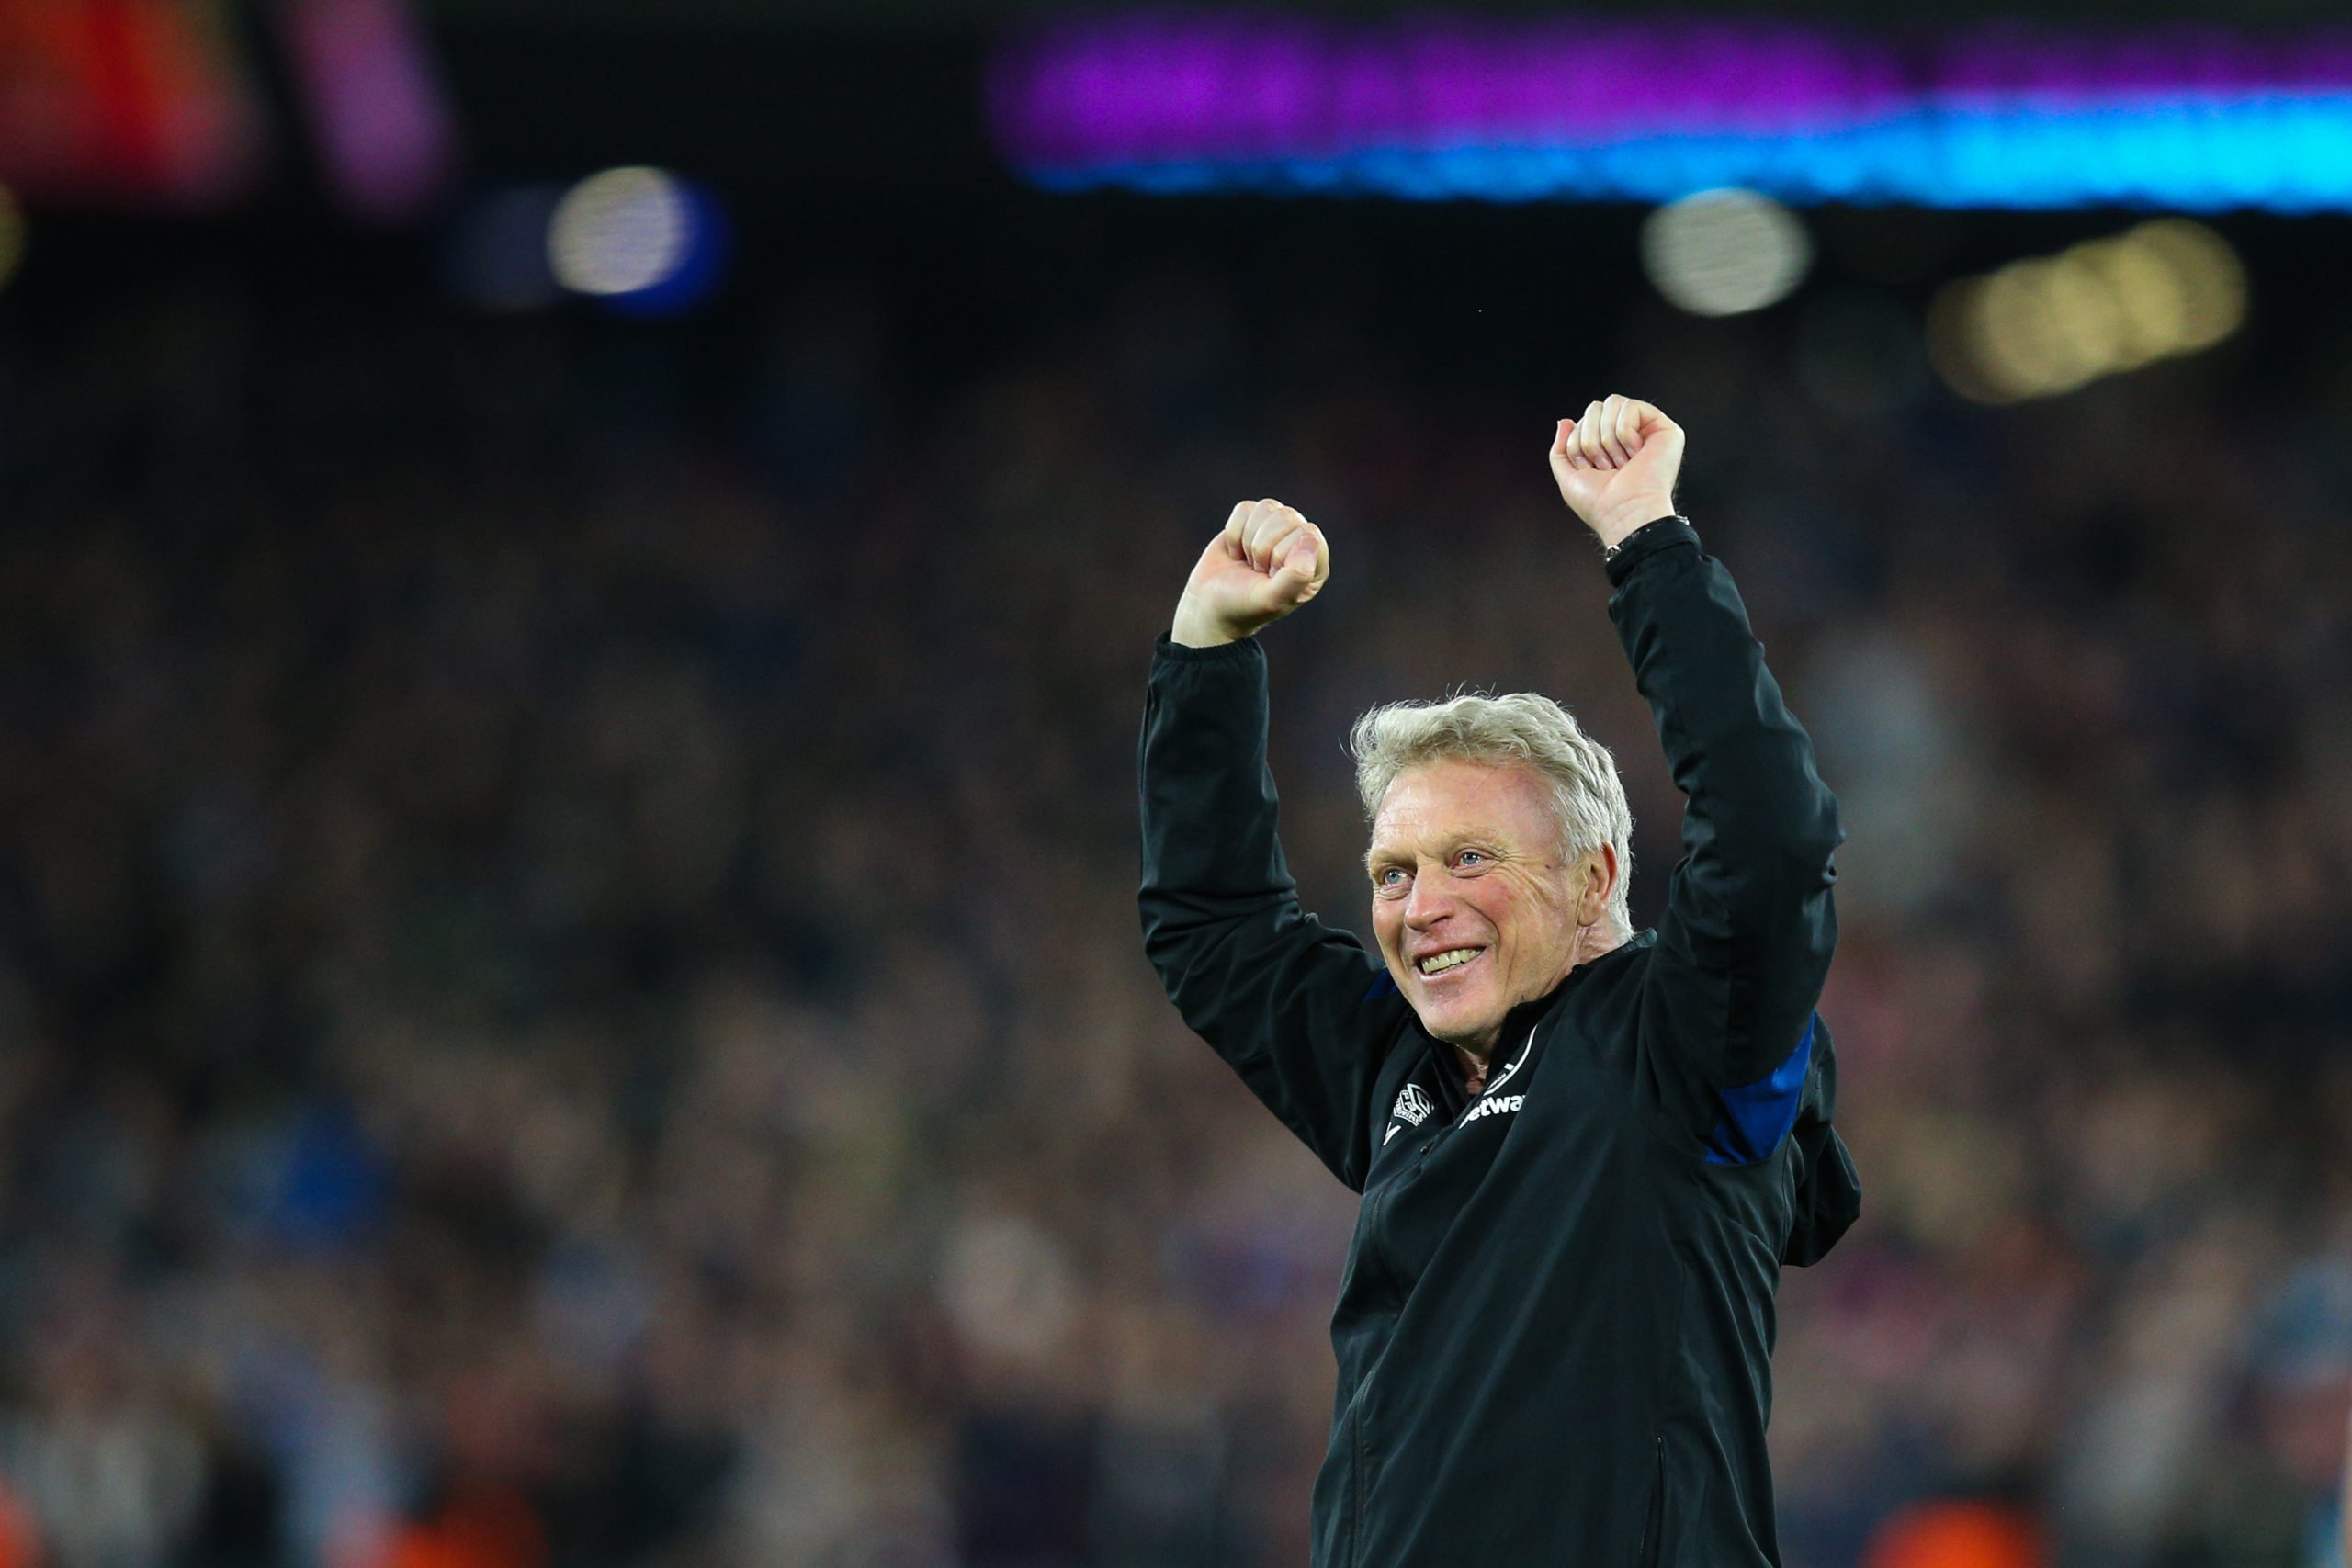 West Ham are massive: David Moyes shares what he's heard about his team